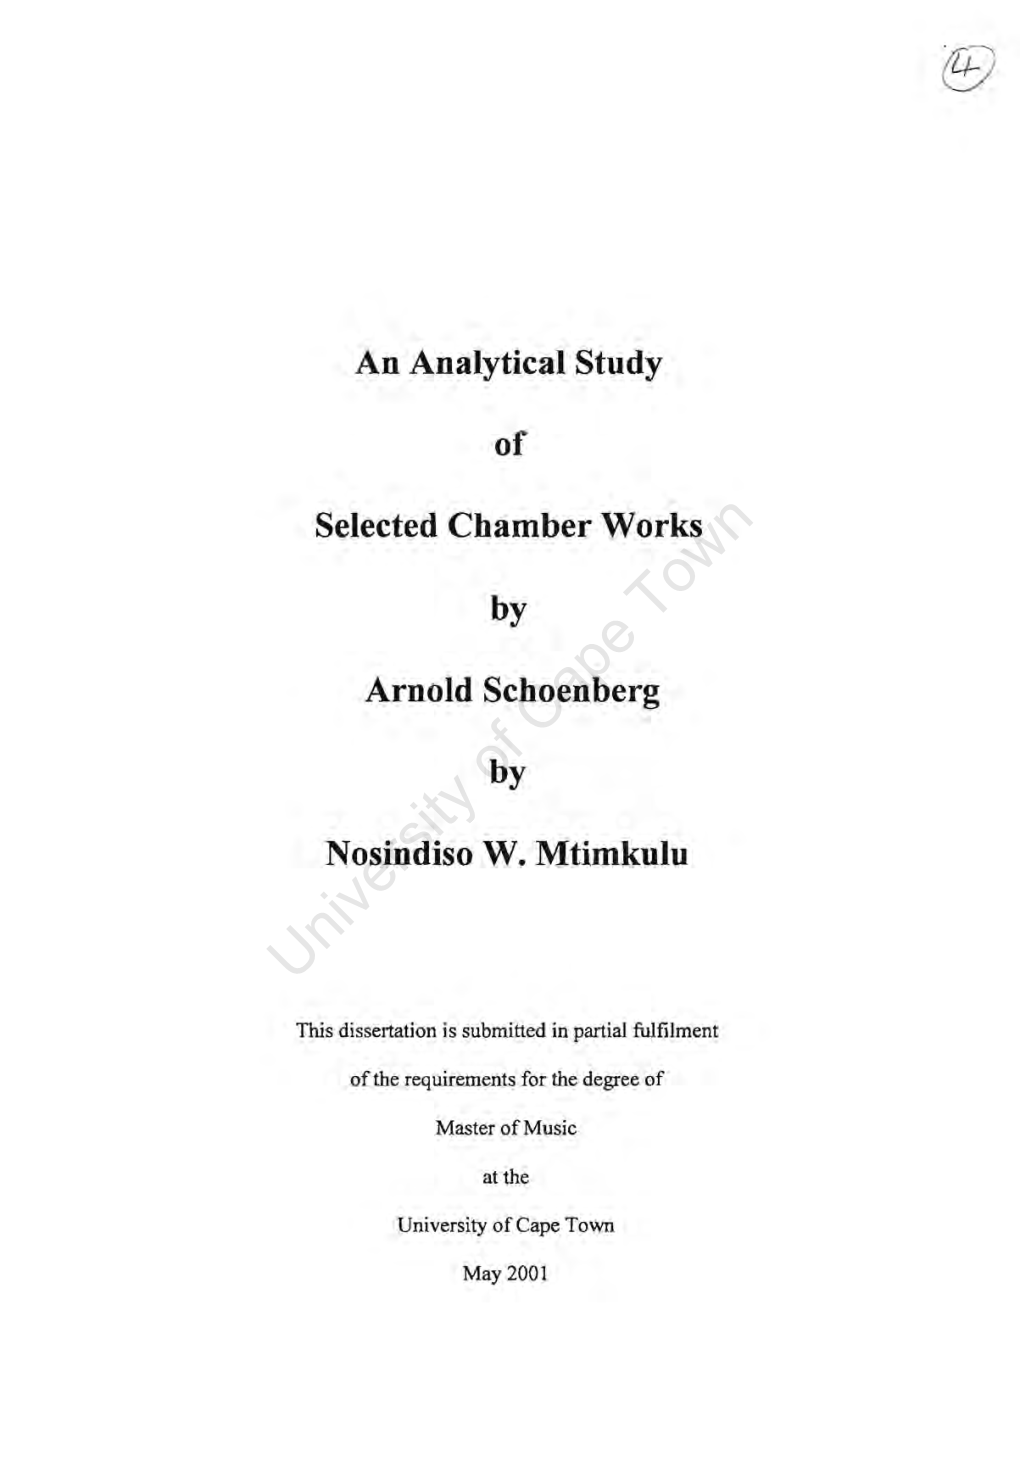 An Analytical Study of Selected Chamber Works by A.Schoenberg